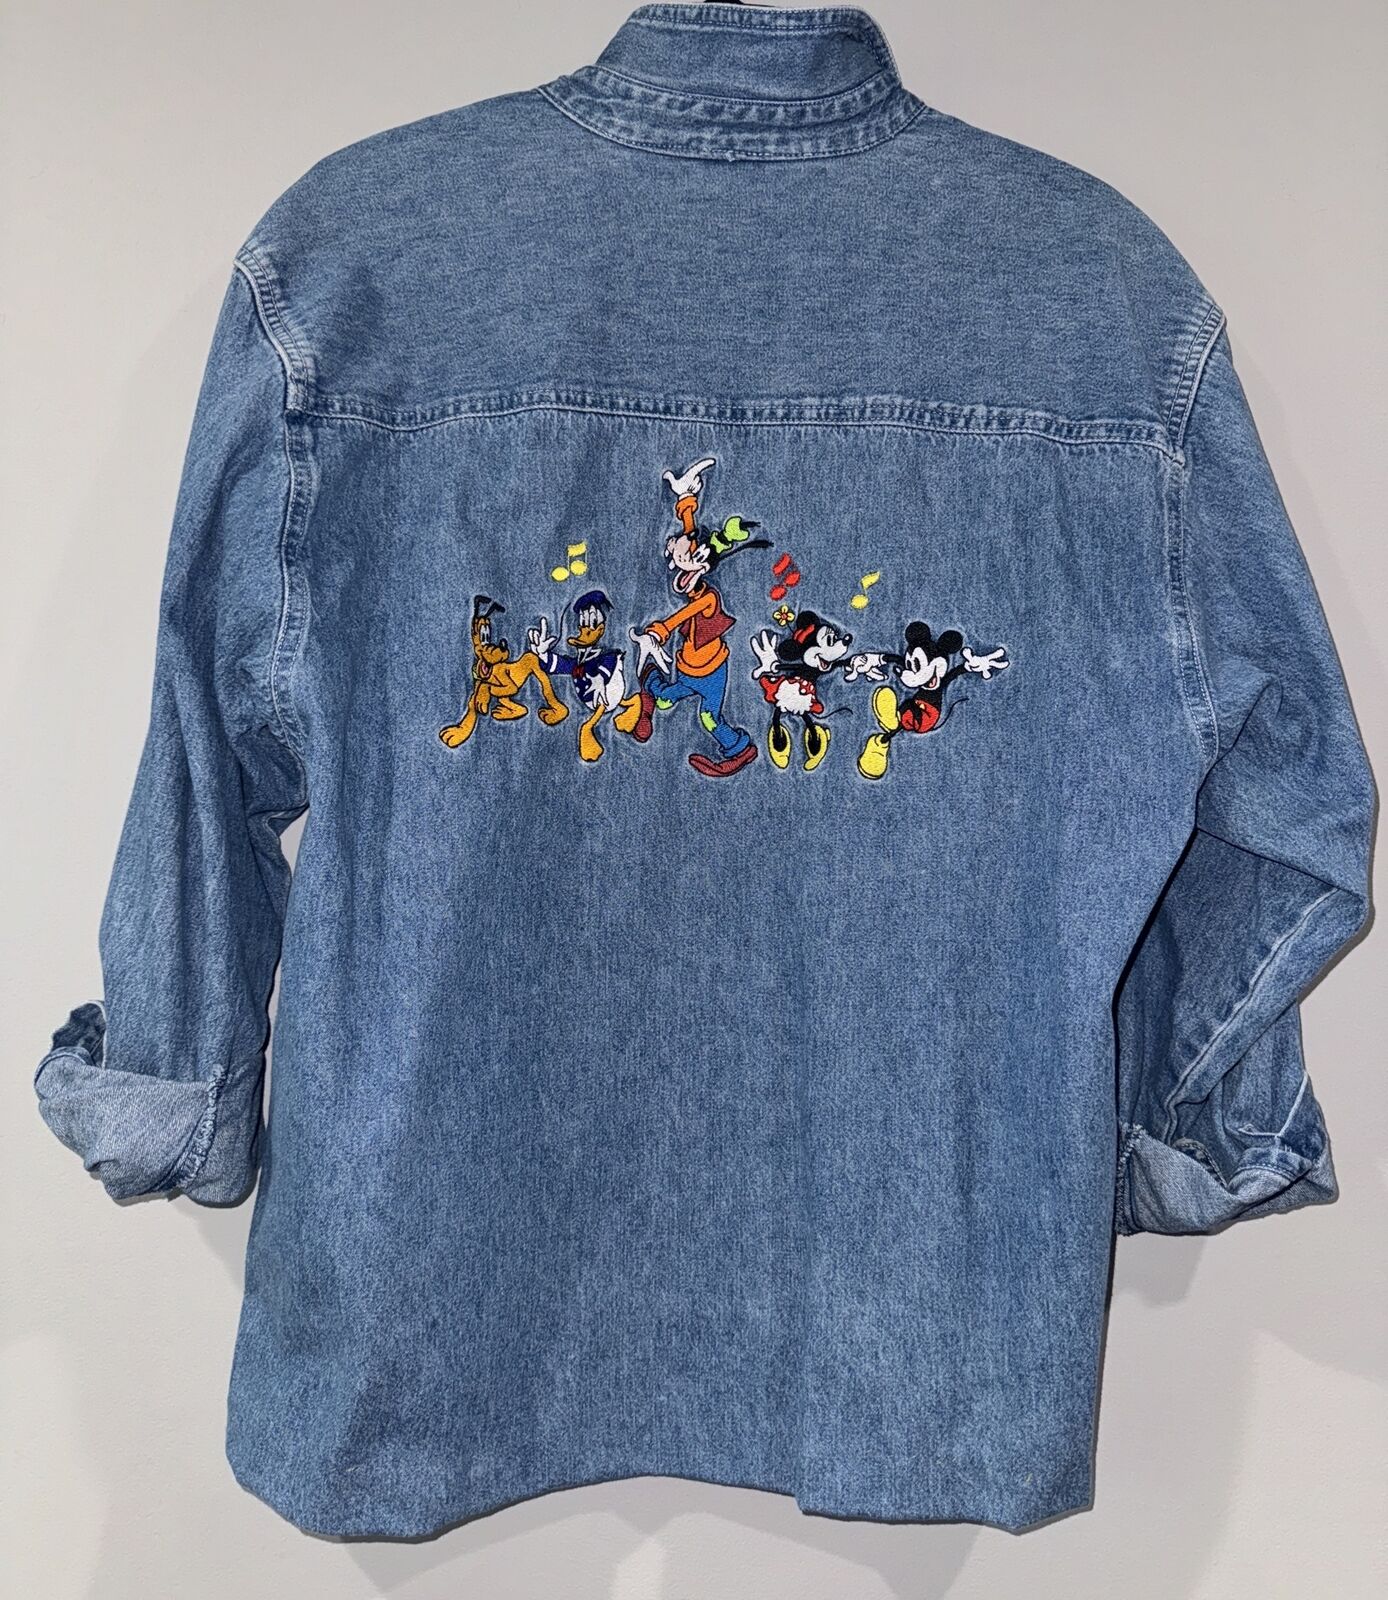 Disney Store Mickey Mouse & Friends Denim Vintage Music Embroidered Shirt Large